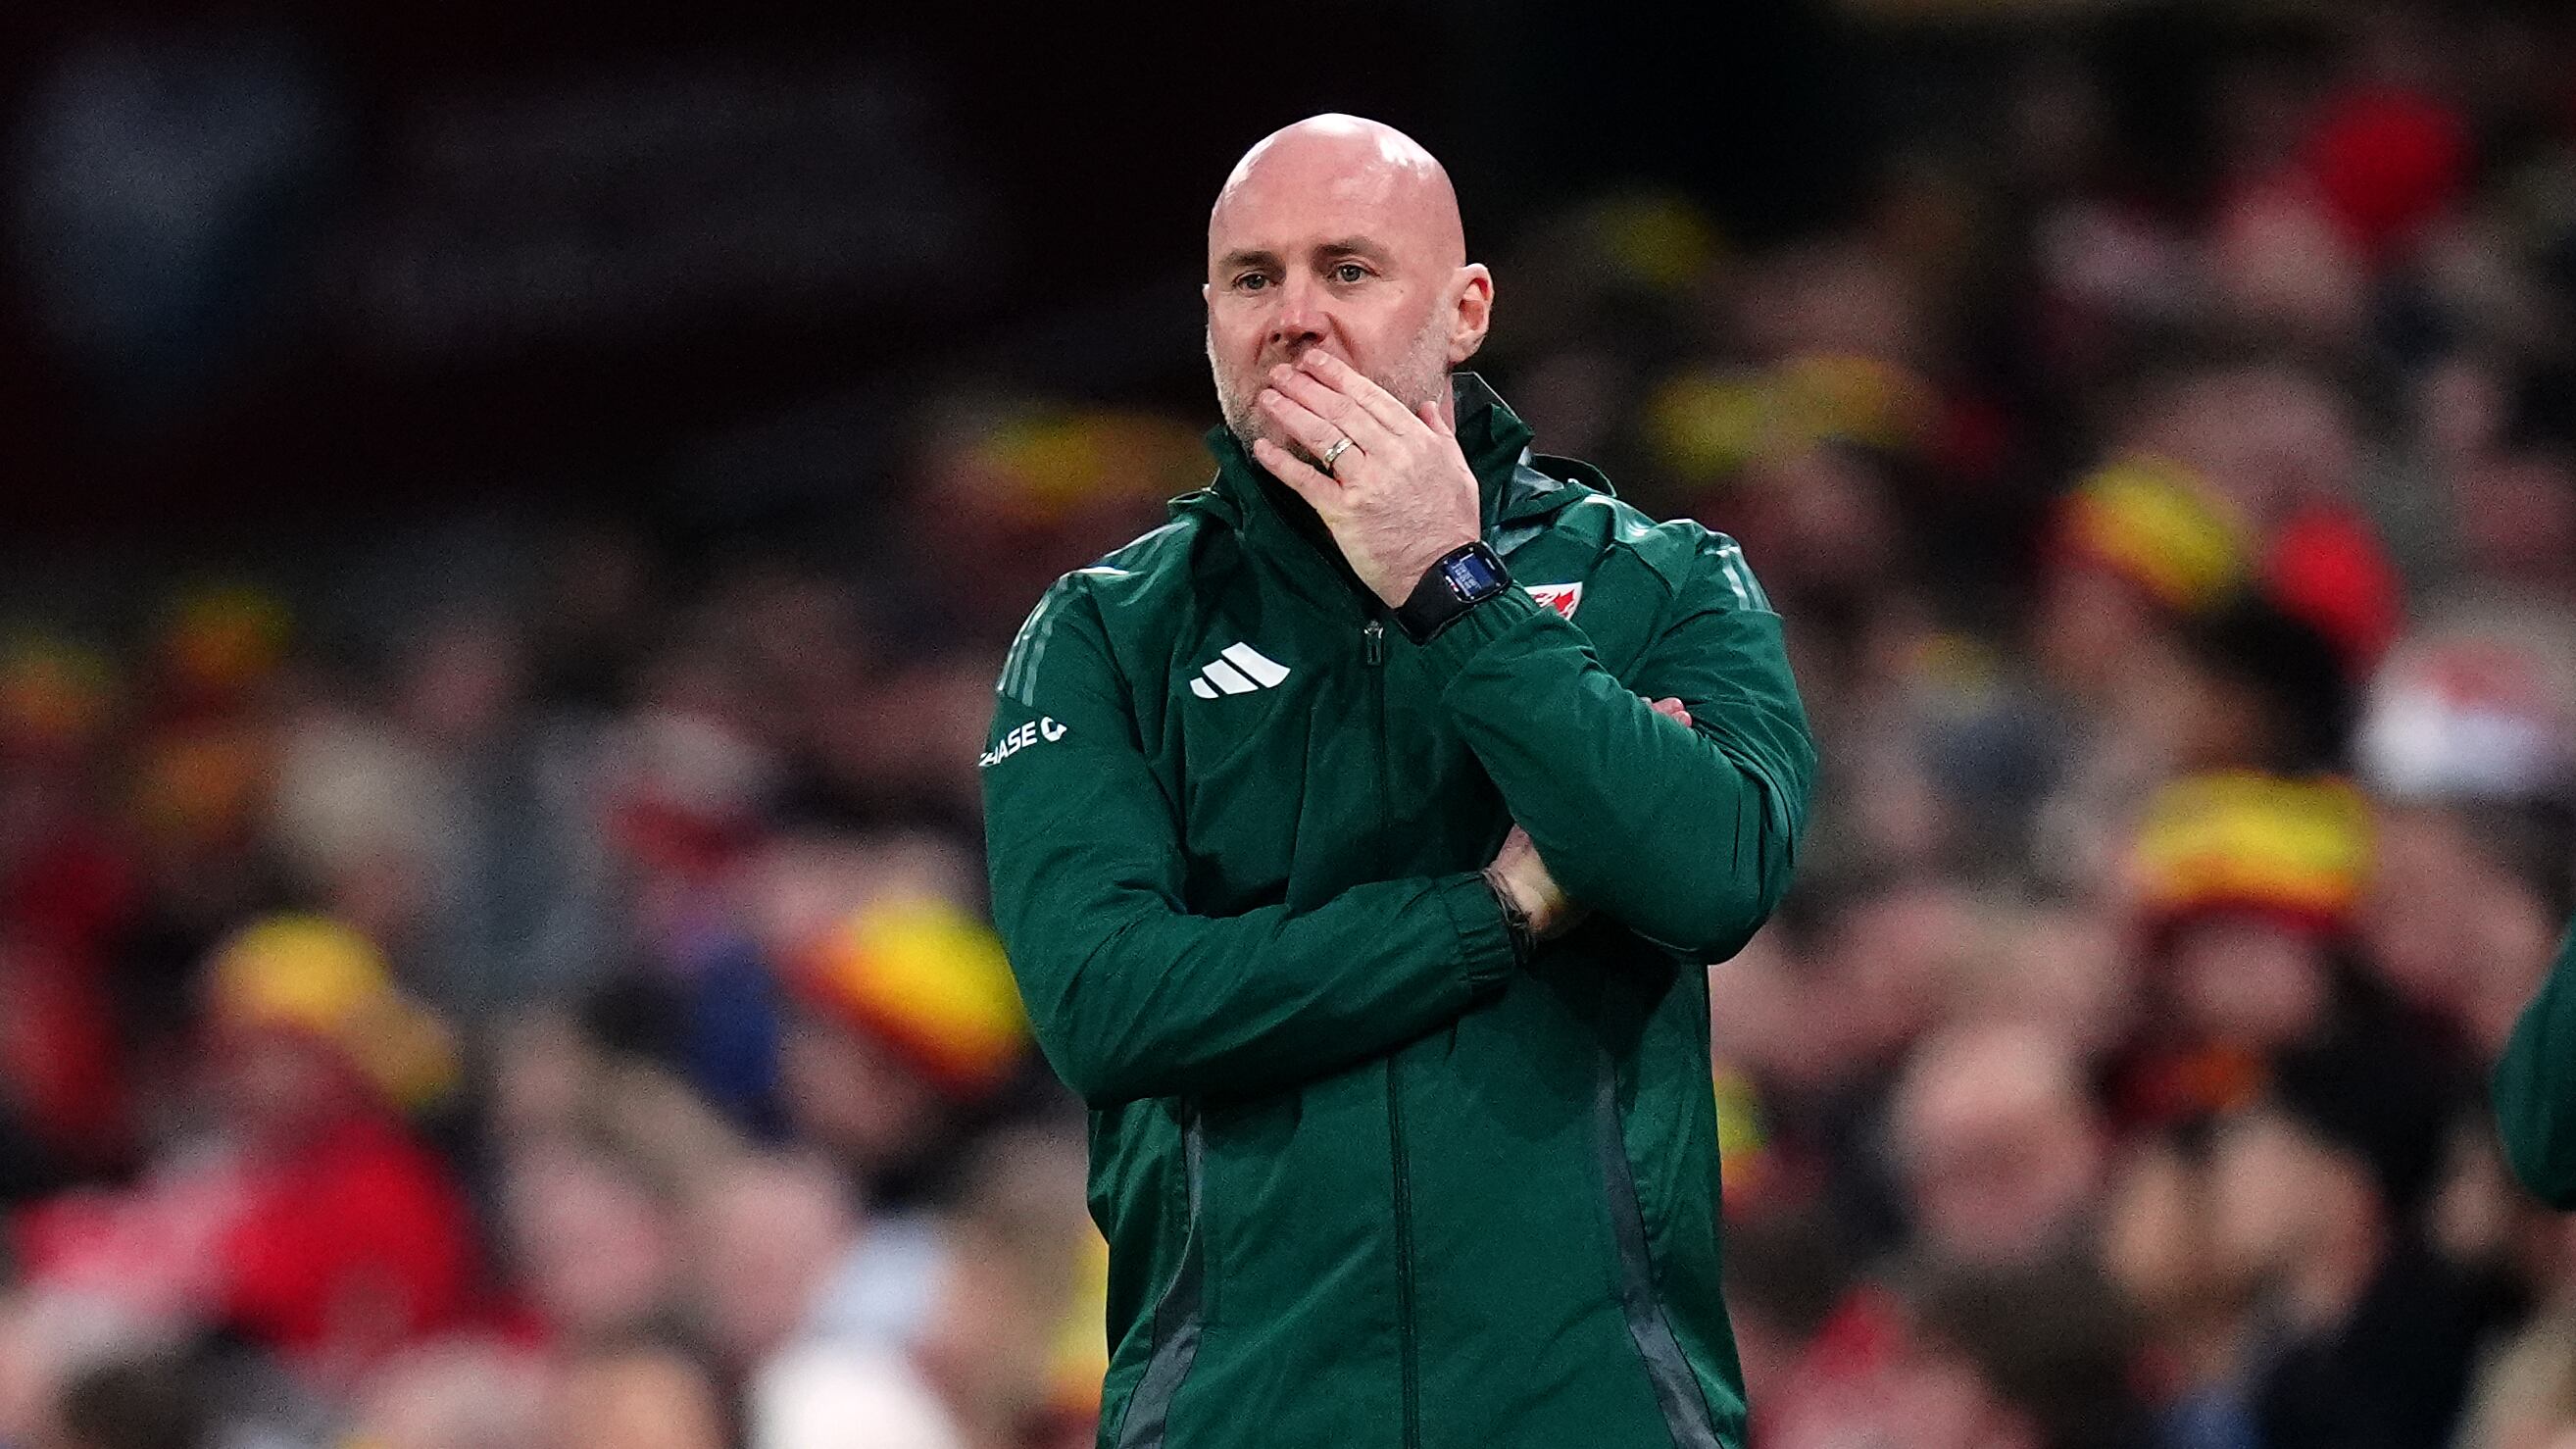 Wales manager Rob Page has his sights set on the 2026 World Cup